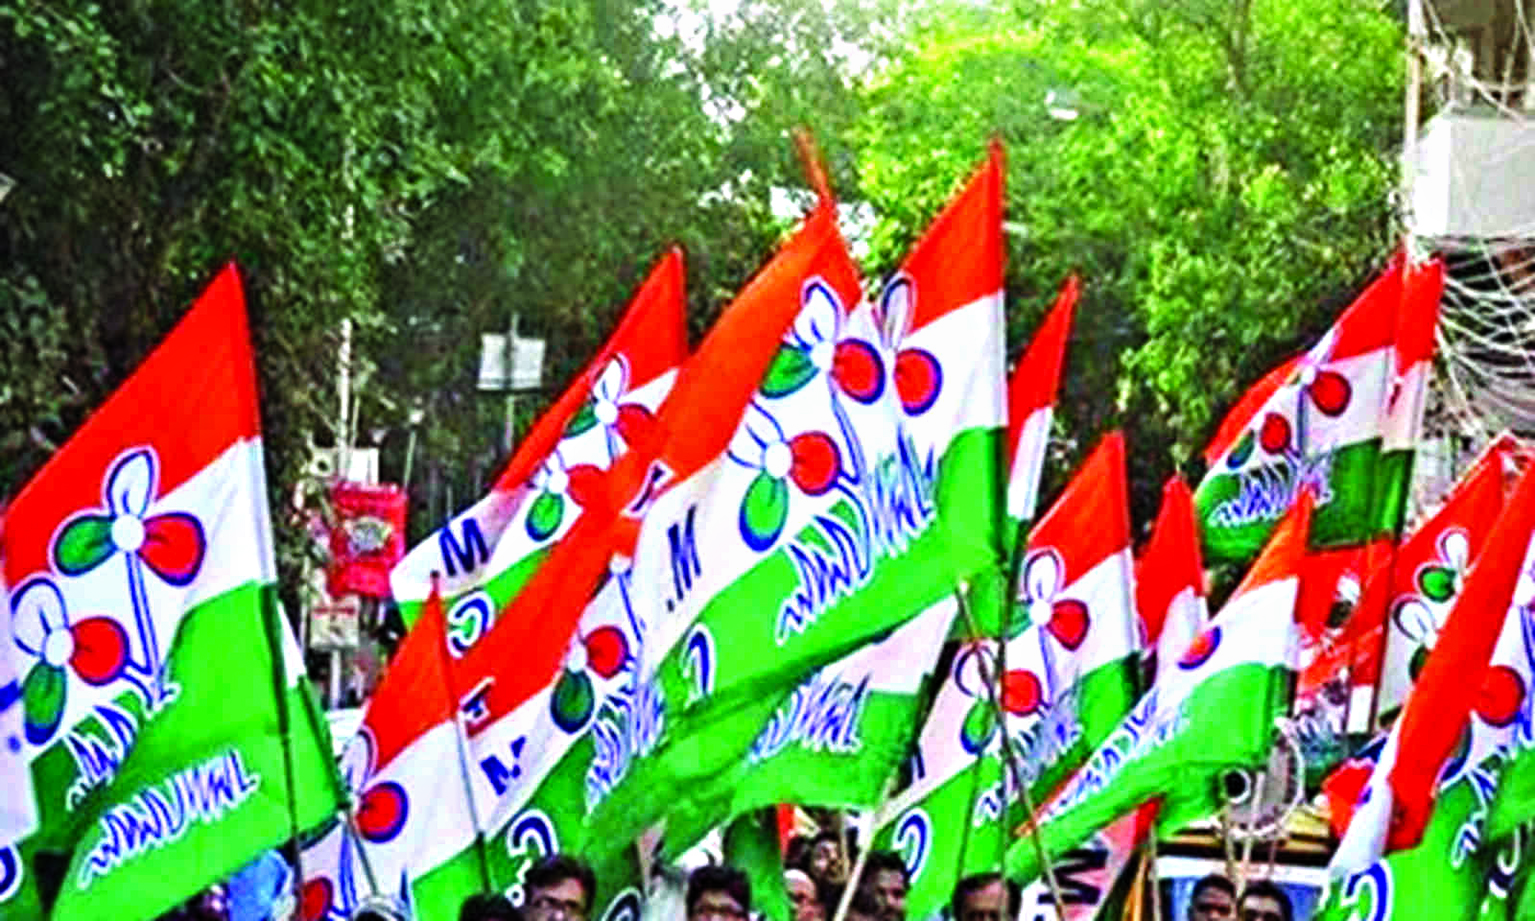 21 Independent GP members join TMC in Islampur